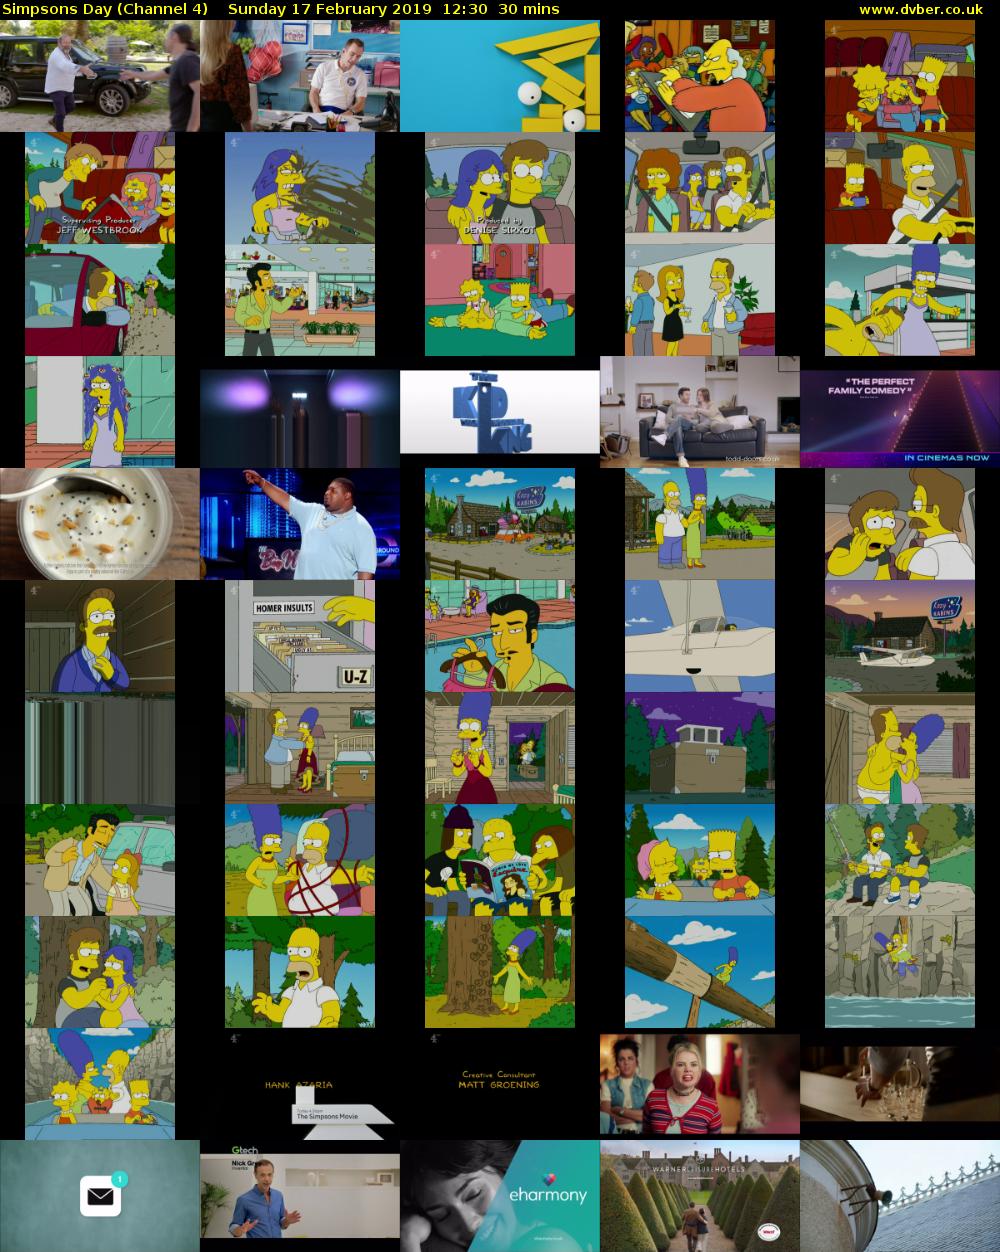 Simpsons Day (Channel 4) Sunday 17 February 2019 12:30 - 13:00